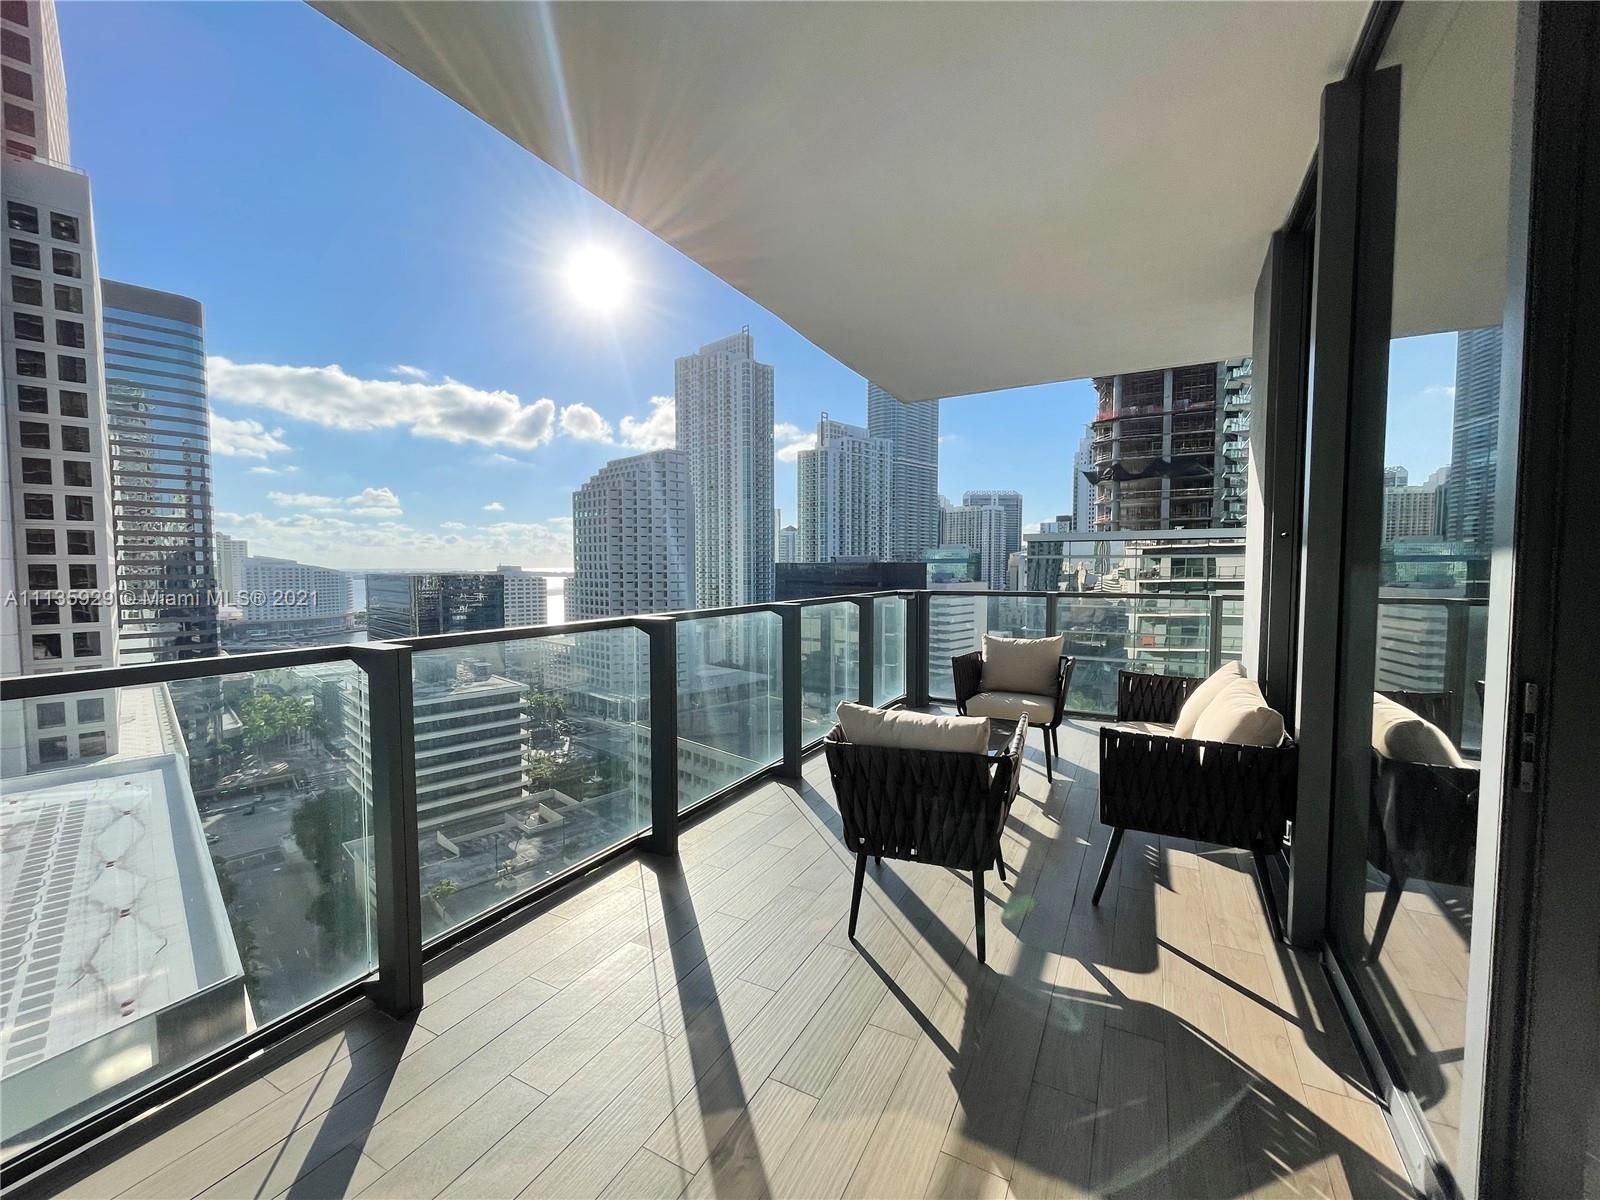 SPECTACULAR 2BR/2.5BA CORNER RESIDENCE IN BRICKELL CITY CENTRE. MOST DESIRABLE AND WELL PRICED 01 CORNER UNIT IN REACH. STUNNING BAY & OCEAN VIEW. FLOW THRU TILE FLOORING, FLOOR TO CEILING WINDOW, +300 SF WRAP AROUND BALCONY, MODERN KITCHEN WITH BOSCH APPLIANCES CUSTOM CLOSET IN MASTER BEDROOM, STONEWALL IN BATHS. BRICKELL CITY CENTRE OFFERS 2 SWIMMING POOLS, BBQ GRILLS, CHILDREN'S PLAY AREA & FITNESS CENTER. WALK TO CASUAL/FINE DINING & SHOPPING. 24 HOUR NOTICE TO SHOW. TENANT OCCUPIED UNTIL AUGUST 14 2022 PAYING $3,950/Month. READ REMARKS BEFORE REQUESTING SHOWING.